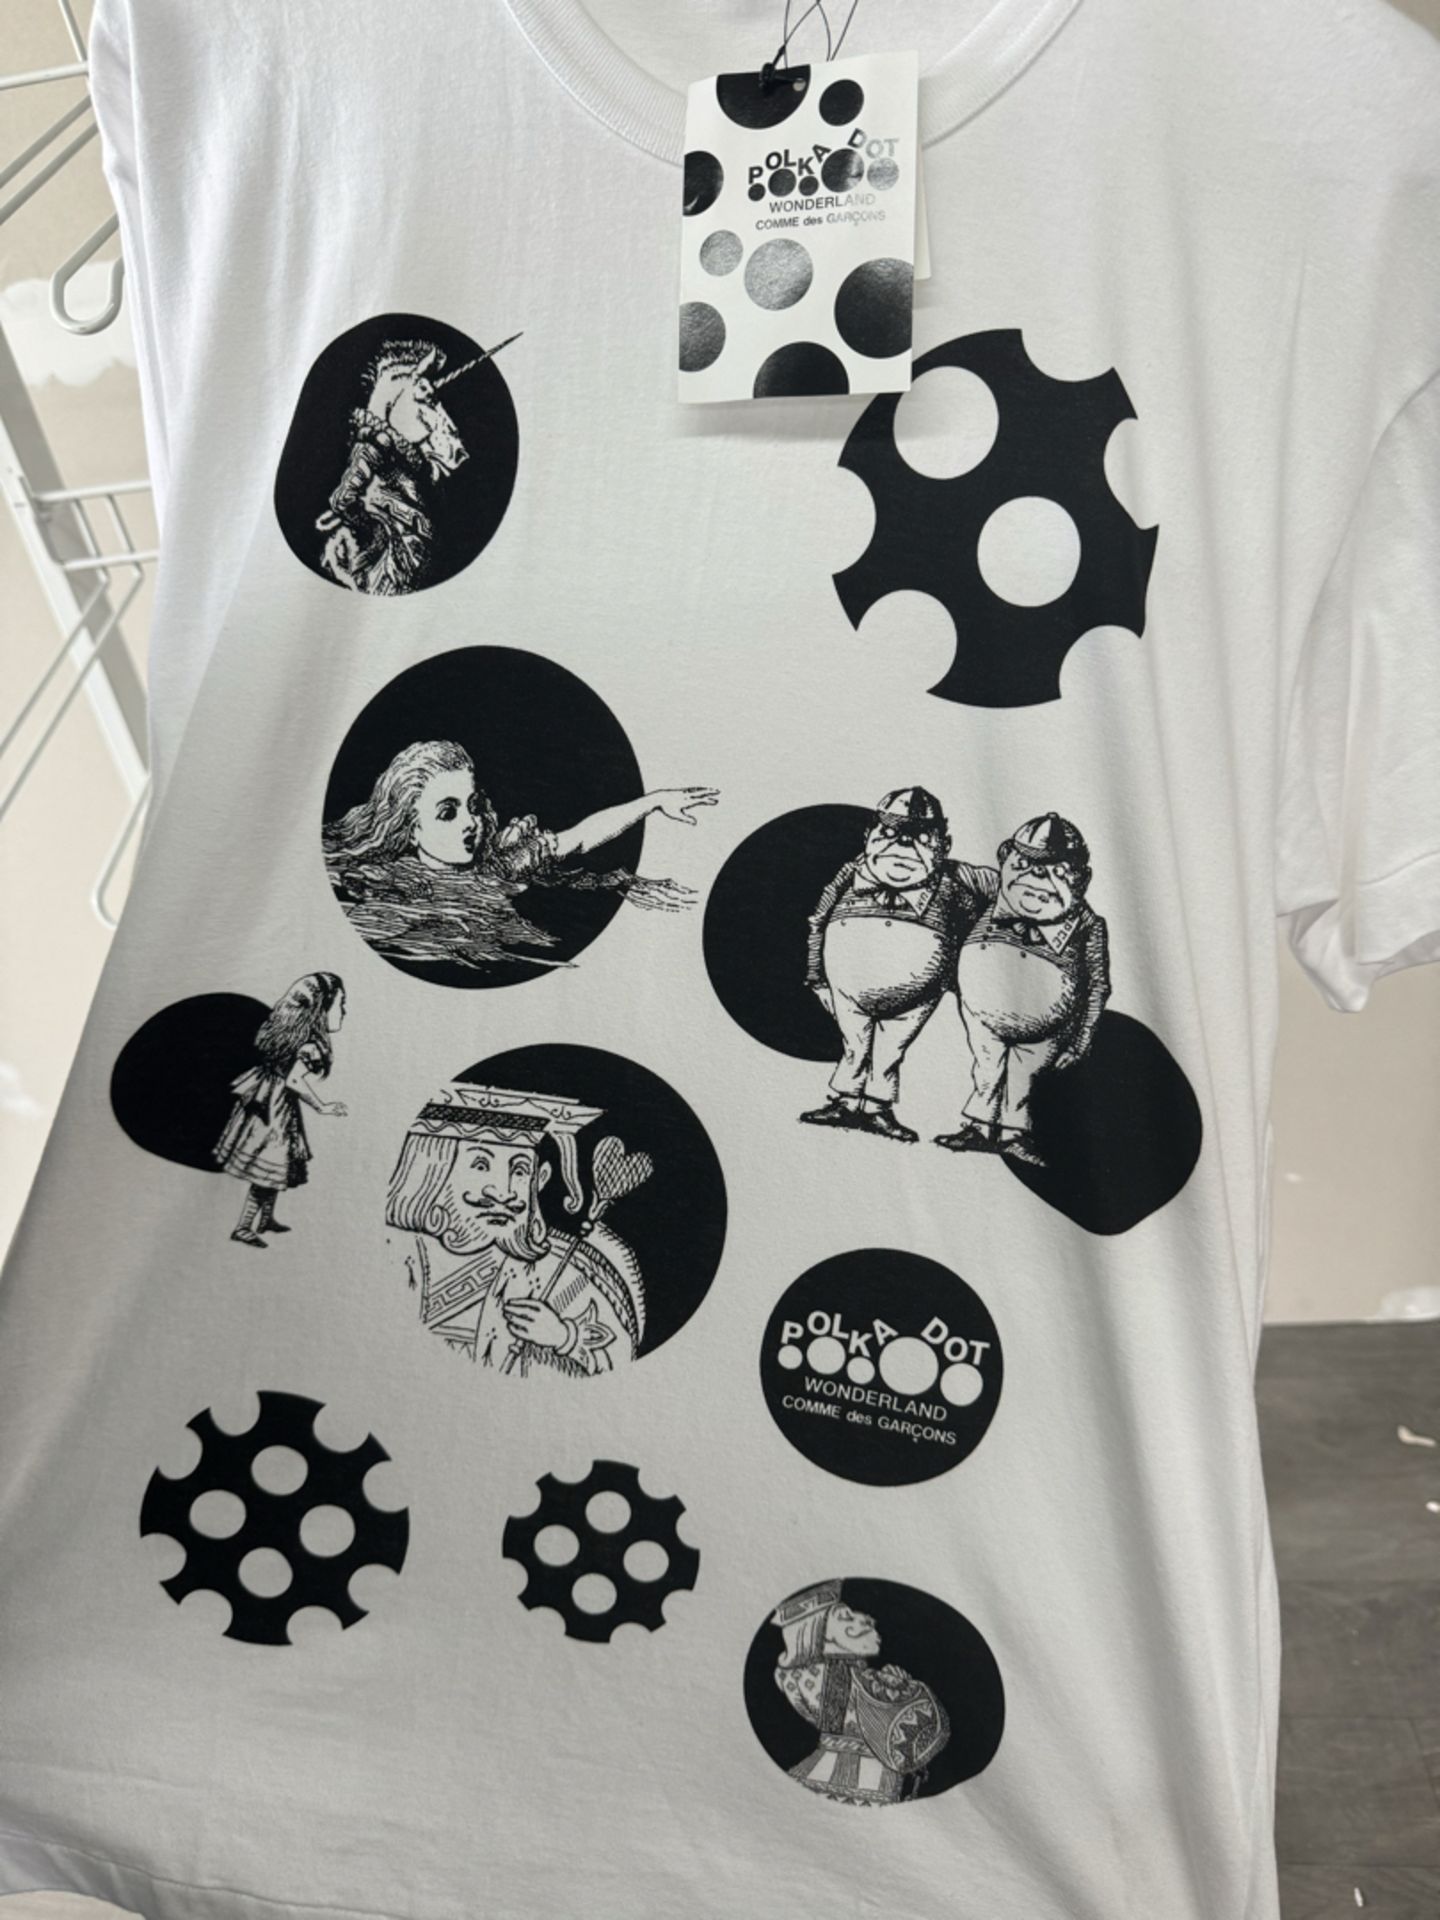 Comme Des GarÃ§ons Unisex T-Shirt - New with Tags - Size Small fit Large - RRP Â£76 - NO VAT! - Image 2 of 3